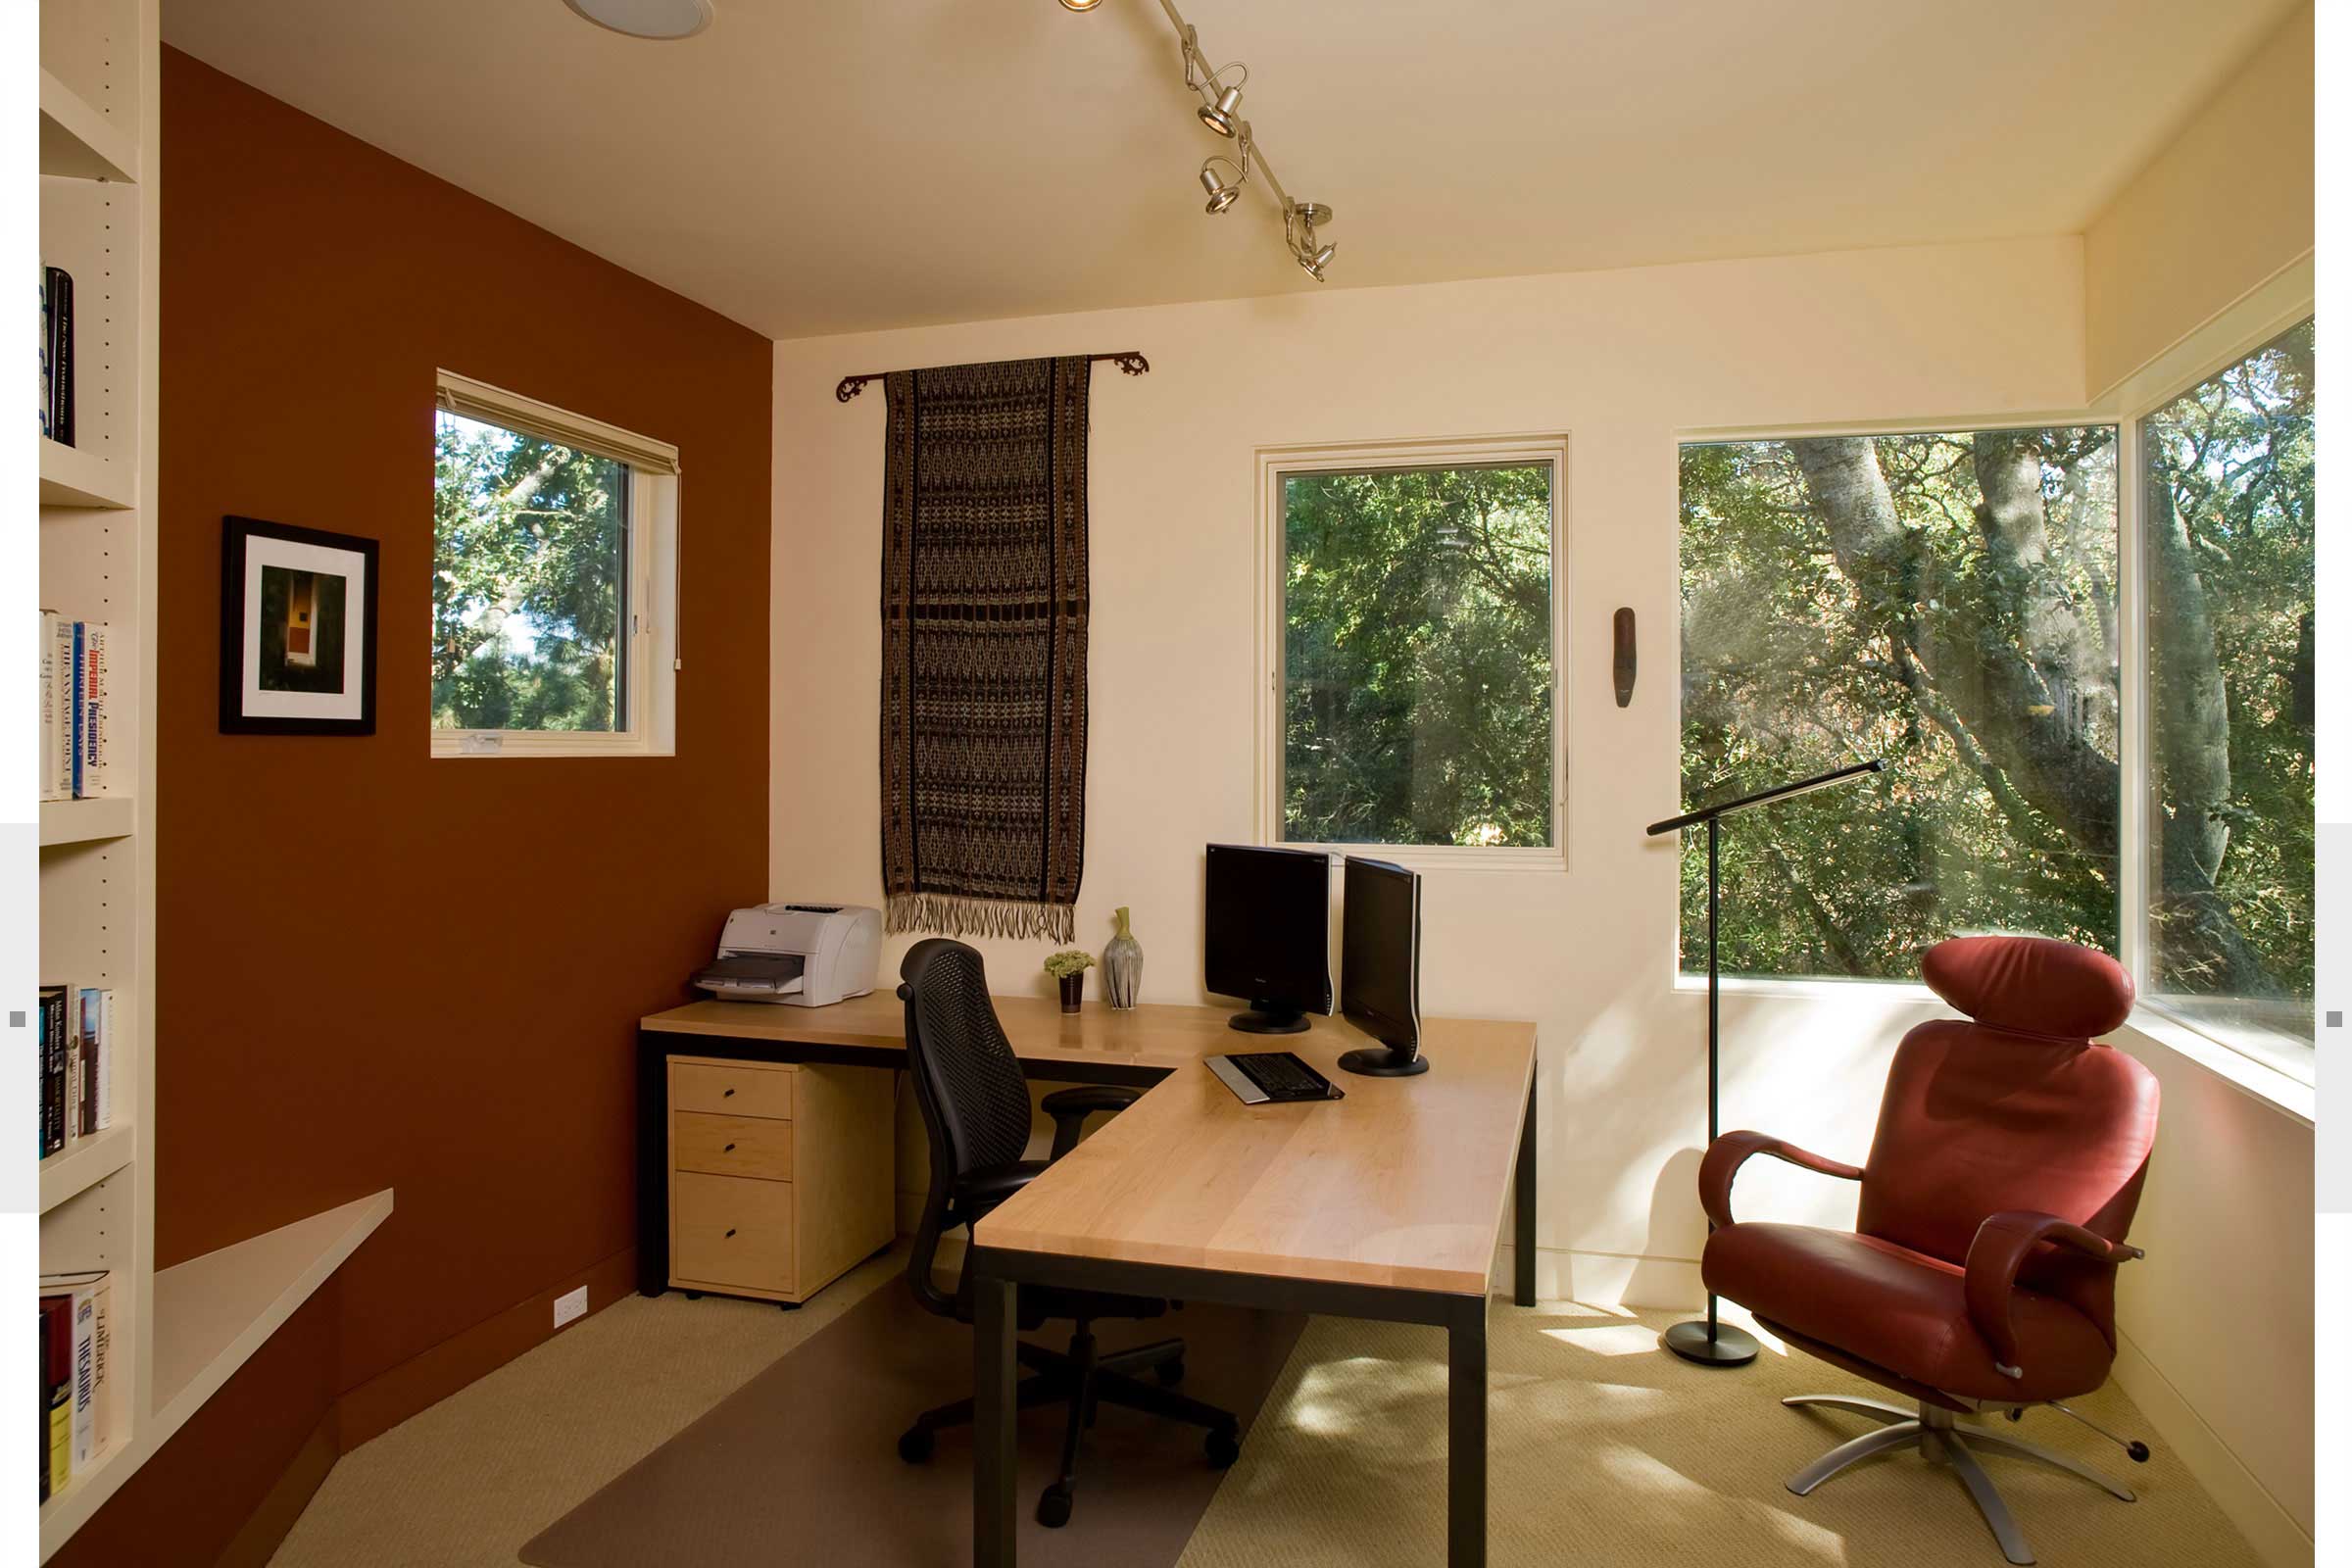 office with ell shaped desk and bookshelves